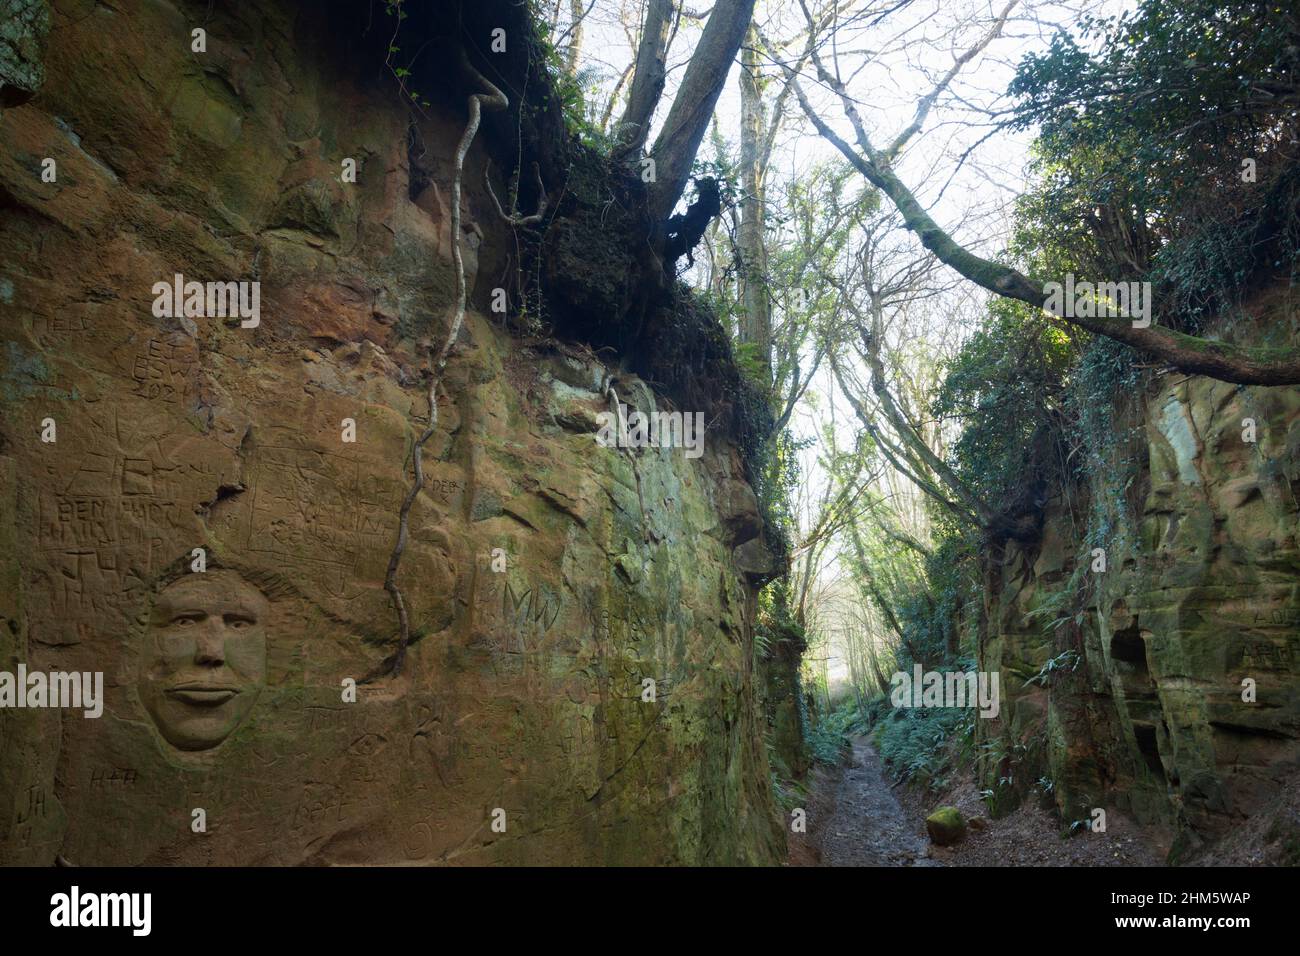 Face carving in a deep holloway worn into the soft sandstone bedrock from hundreds of years of footfall. Dorset, UK. Stock Photo